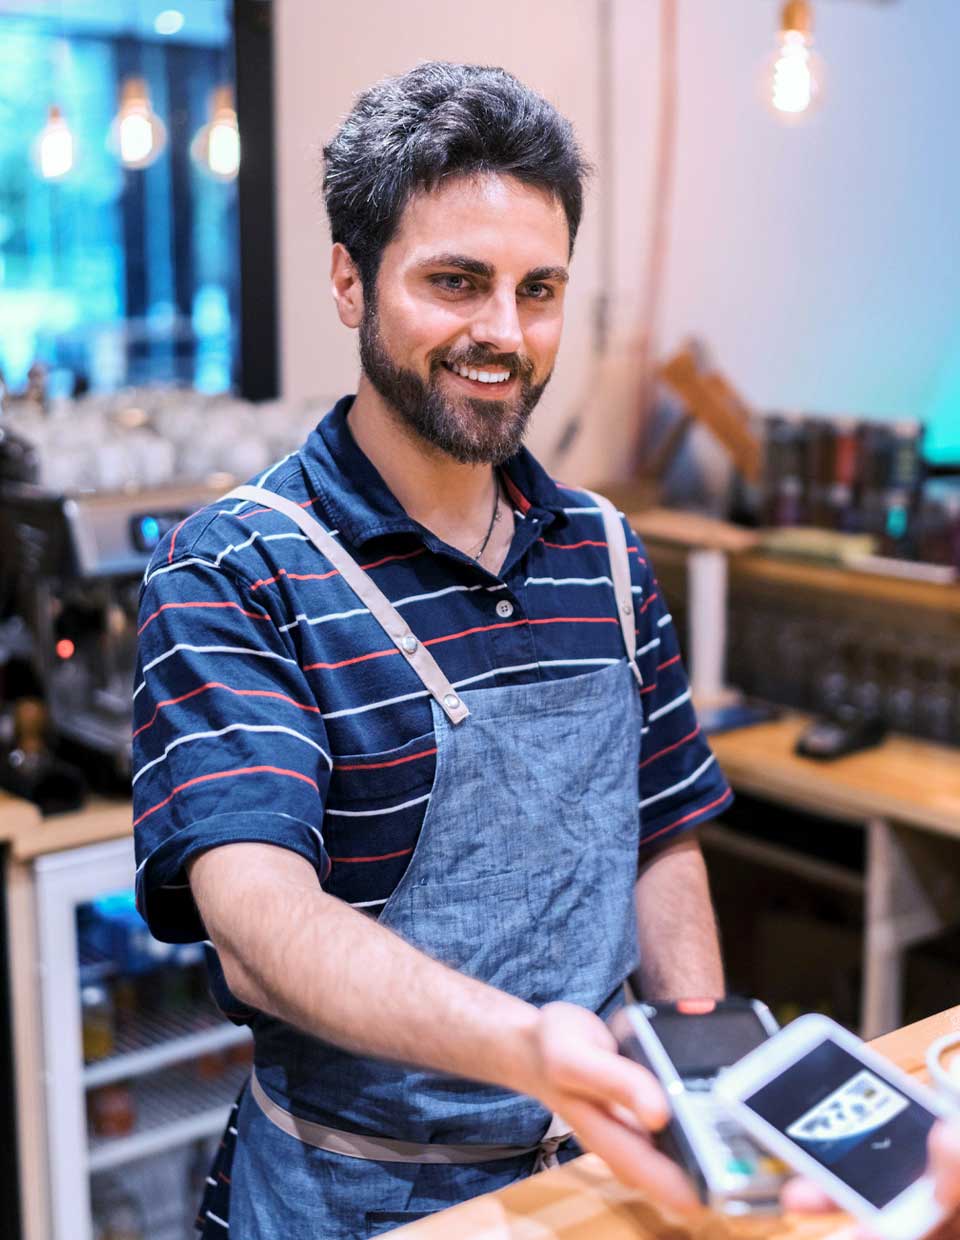 promo image for cafe owner using pos terminal for contactless payment